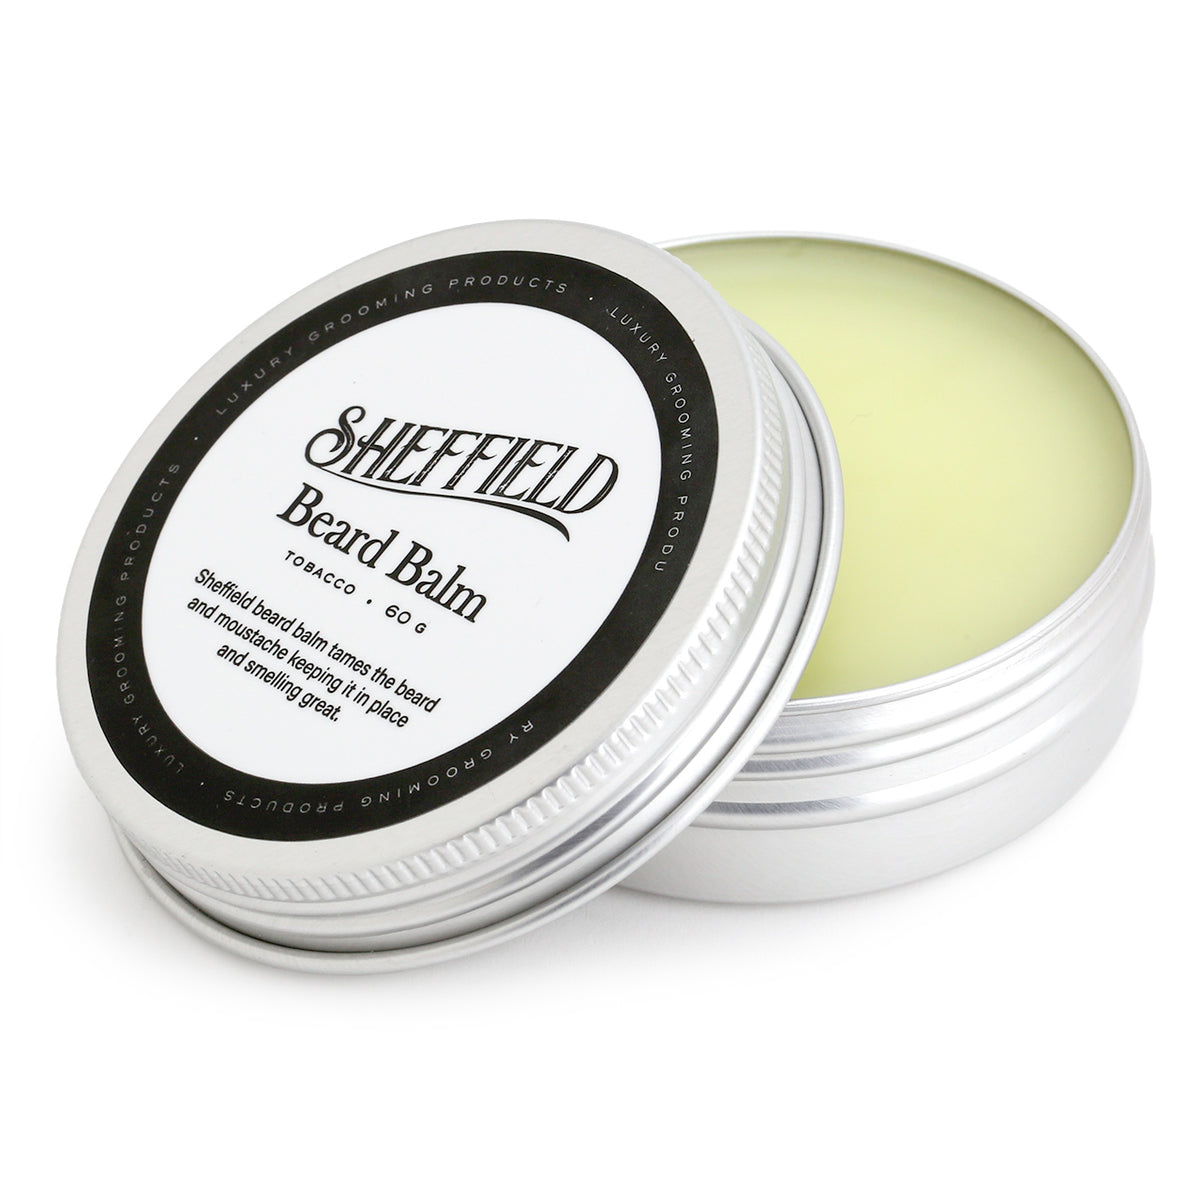 Sheffield Beard Balm 60g, Tobacco. Showing open tin with smooth light coloured balm. 